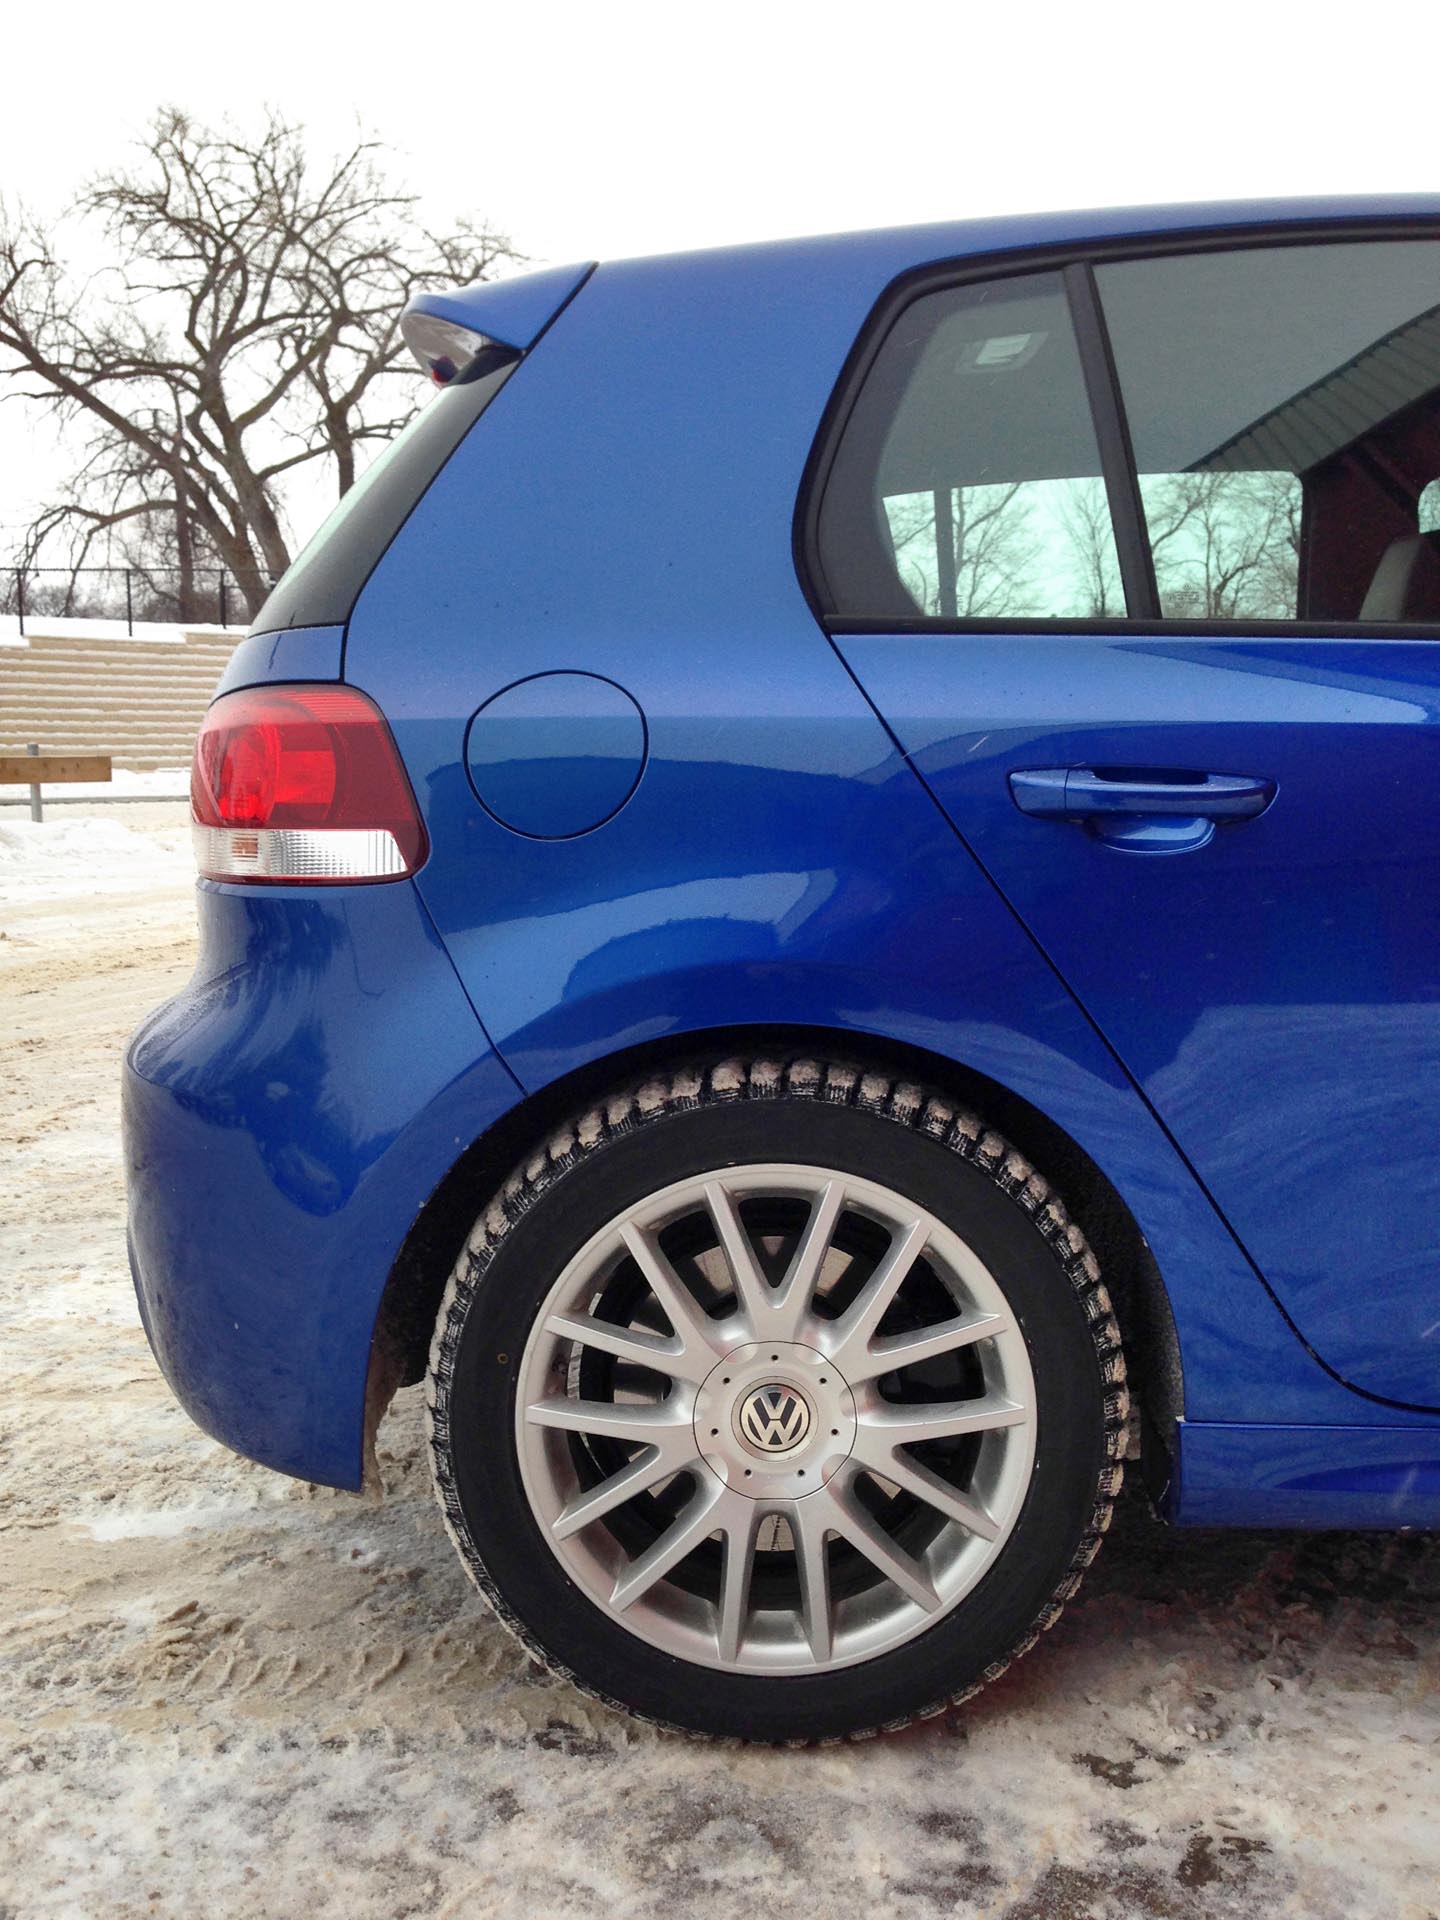 Winter Tire Review: Toyo Observe G3-Ice - Page 3 of 3 - Autos.ca | Page 3